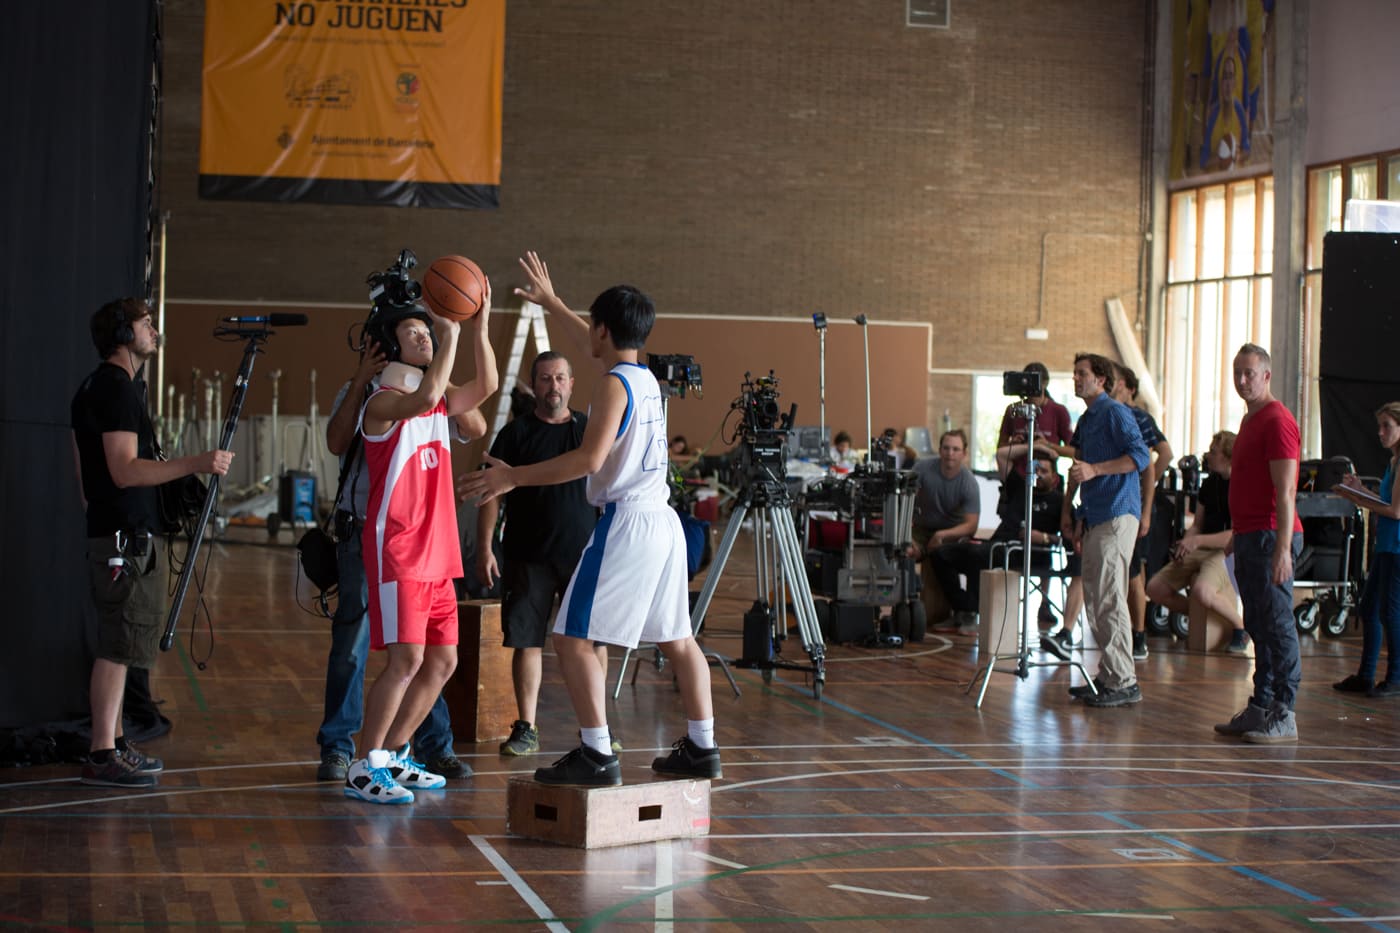 Video reportage of behind-the-scenes of basketball players playing ball